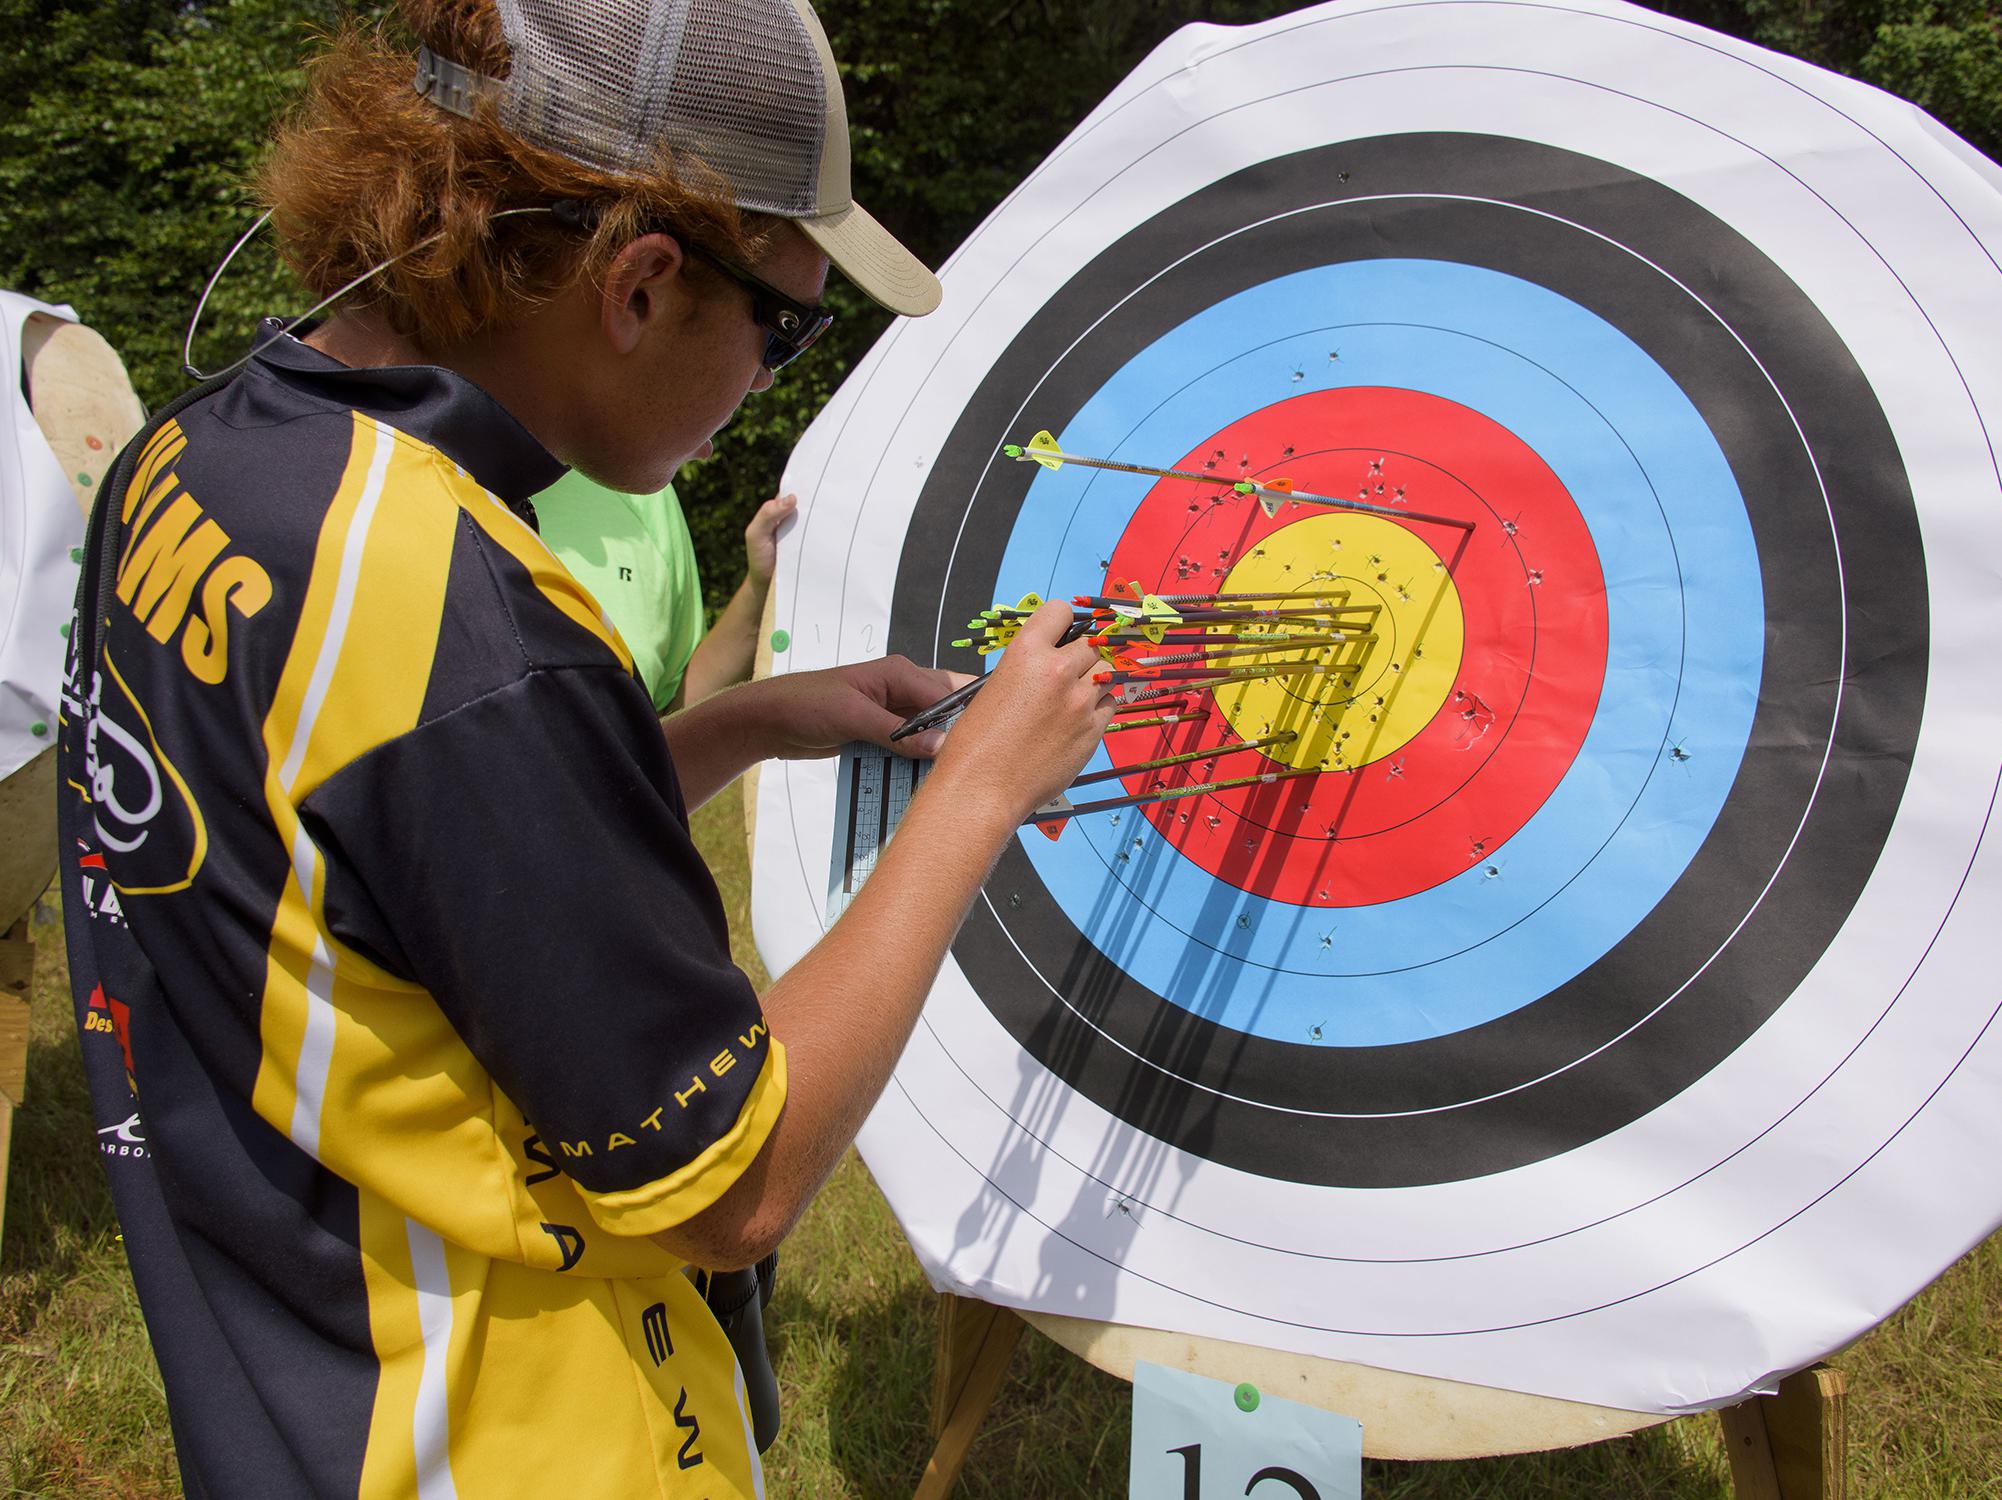 A 4-H’er wearing sunglasses tallies arrows in a colorful paper archery target.